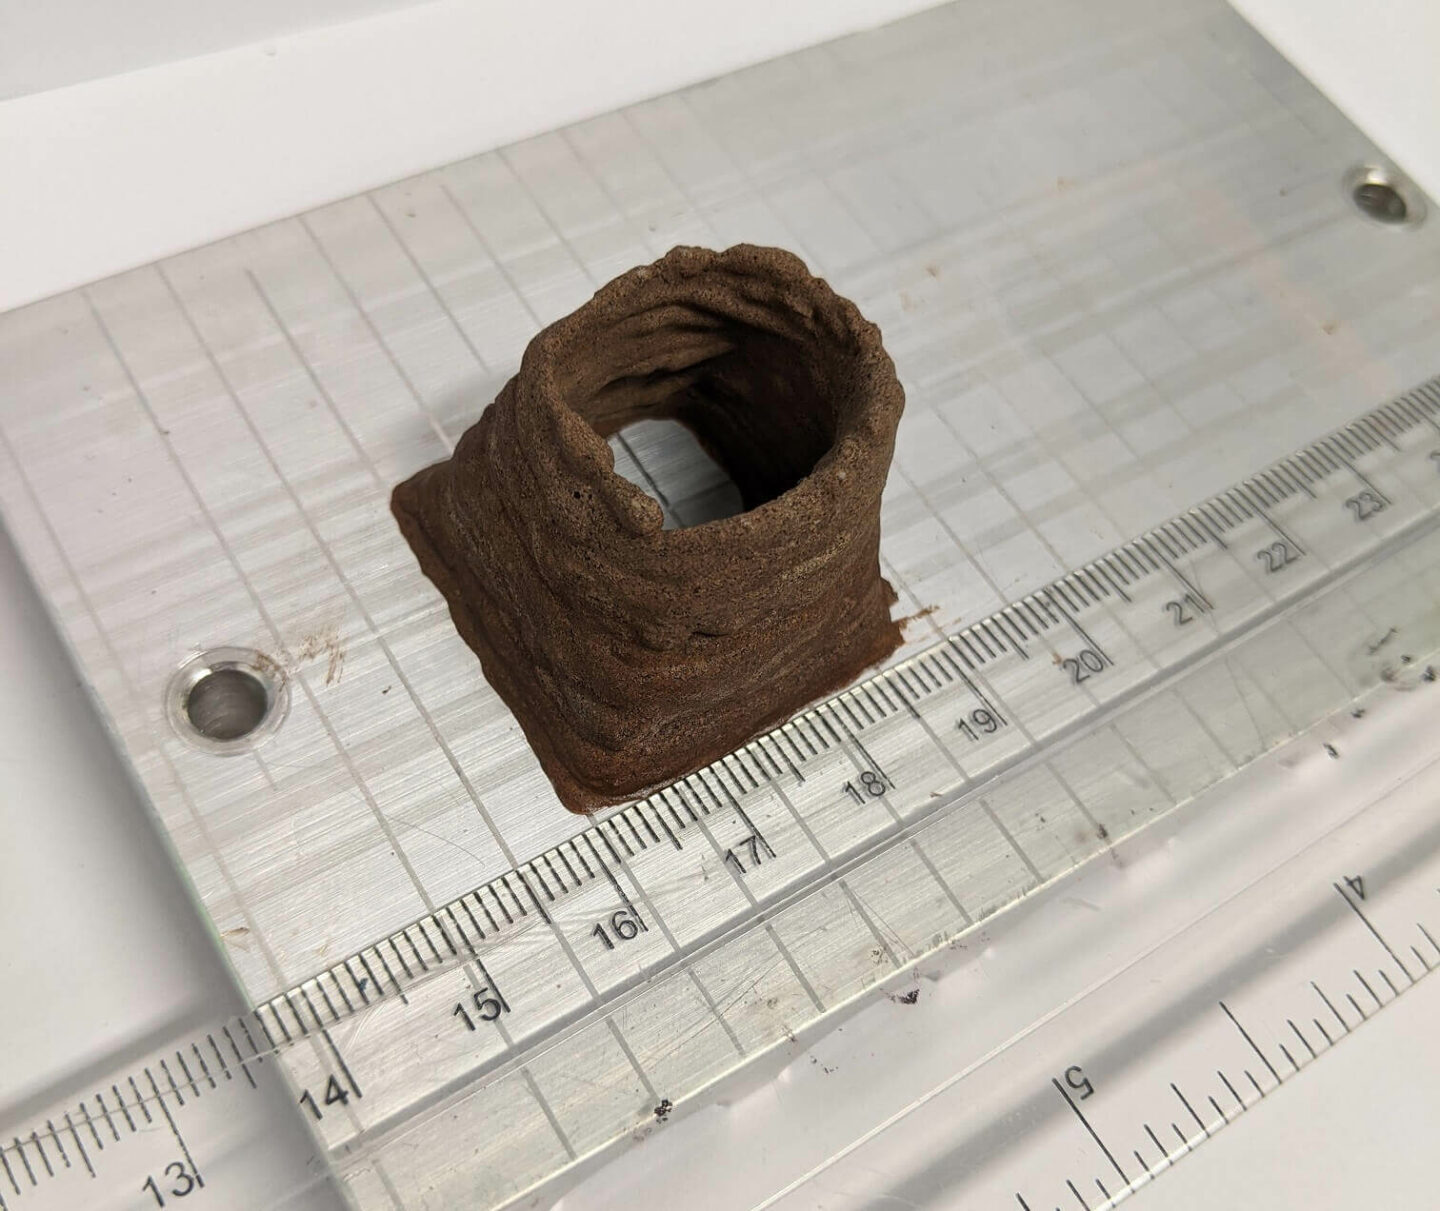 A brown, hollow mound. It is next to a rule. It is 2cm wide